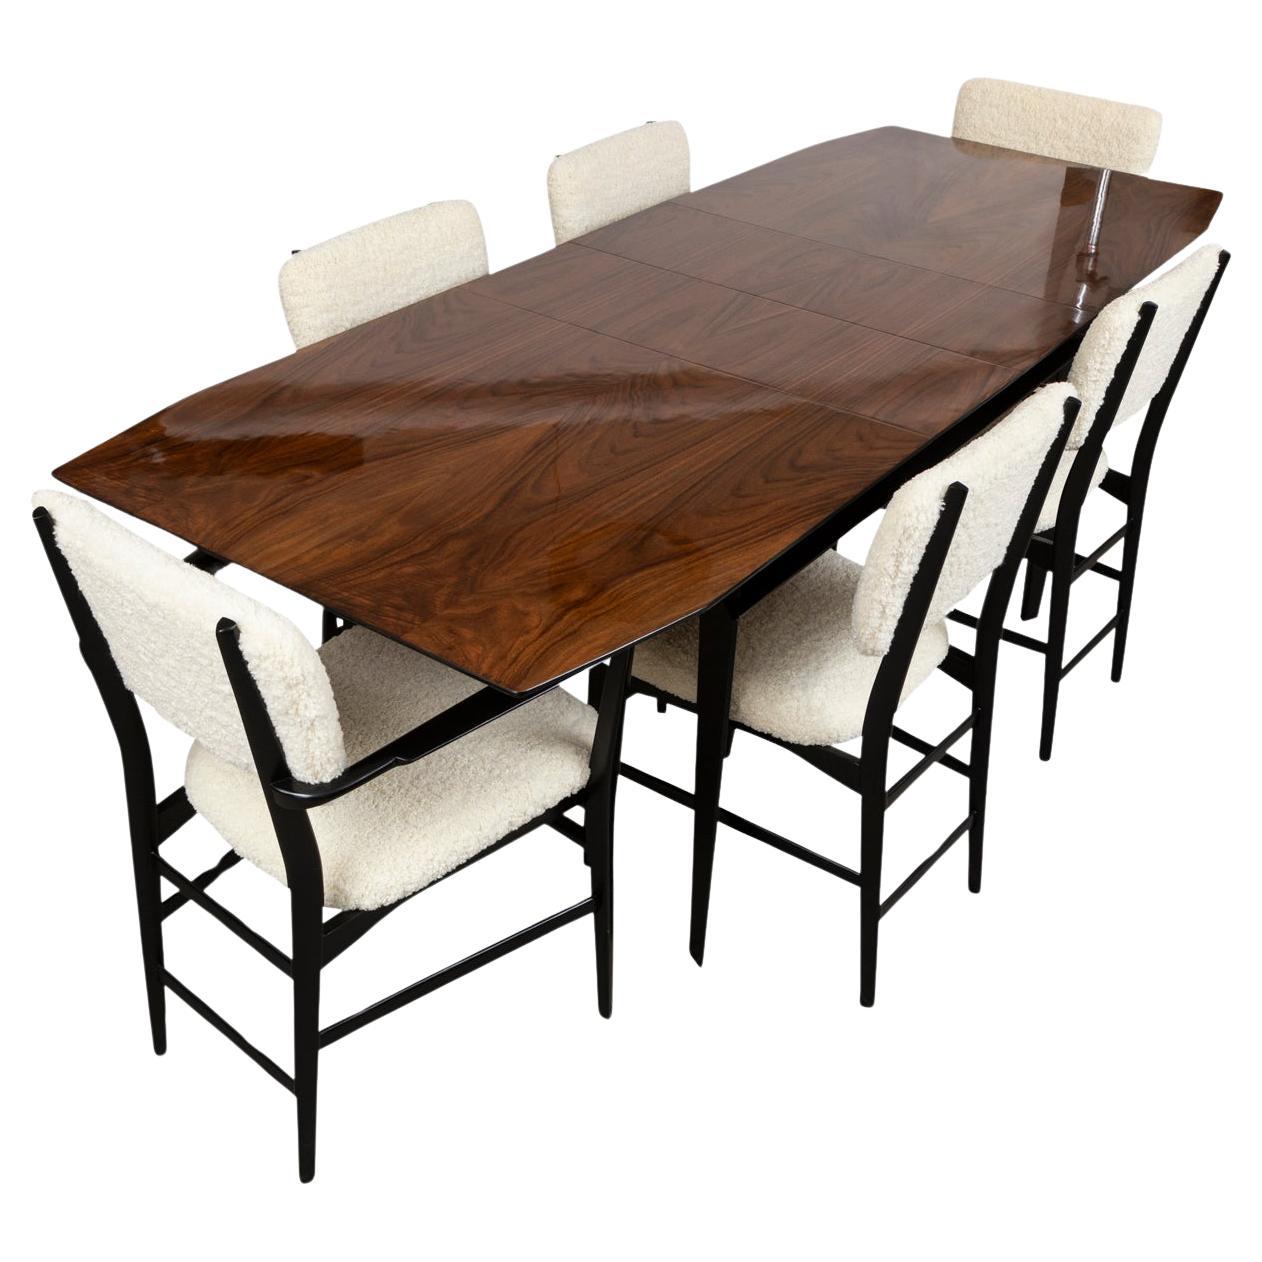 Italian Mid Century Dassi Dining Table With Six Chairs By Edmondo Palutari  For Sale